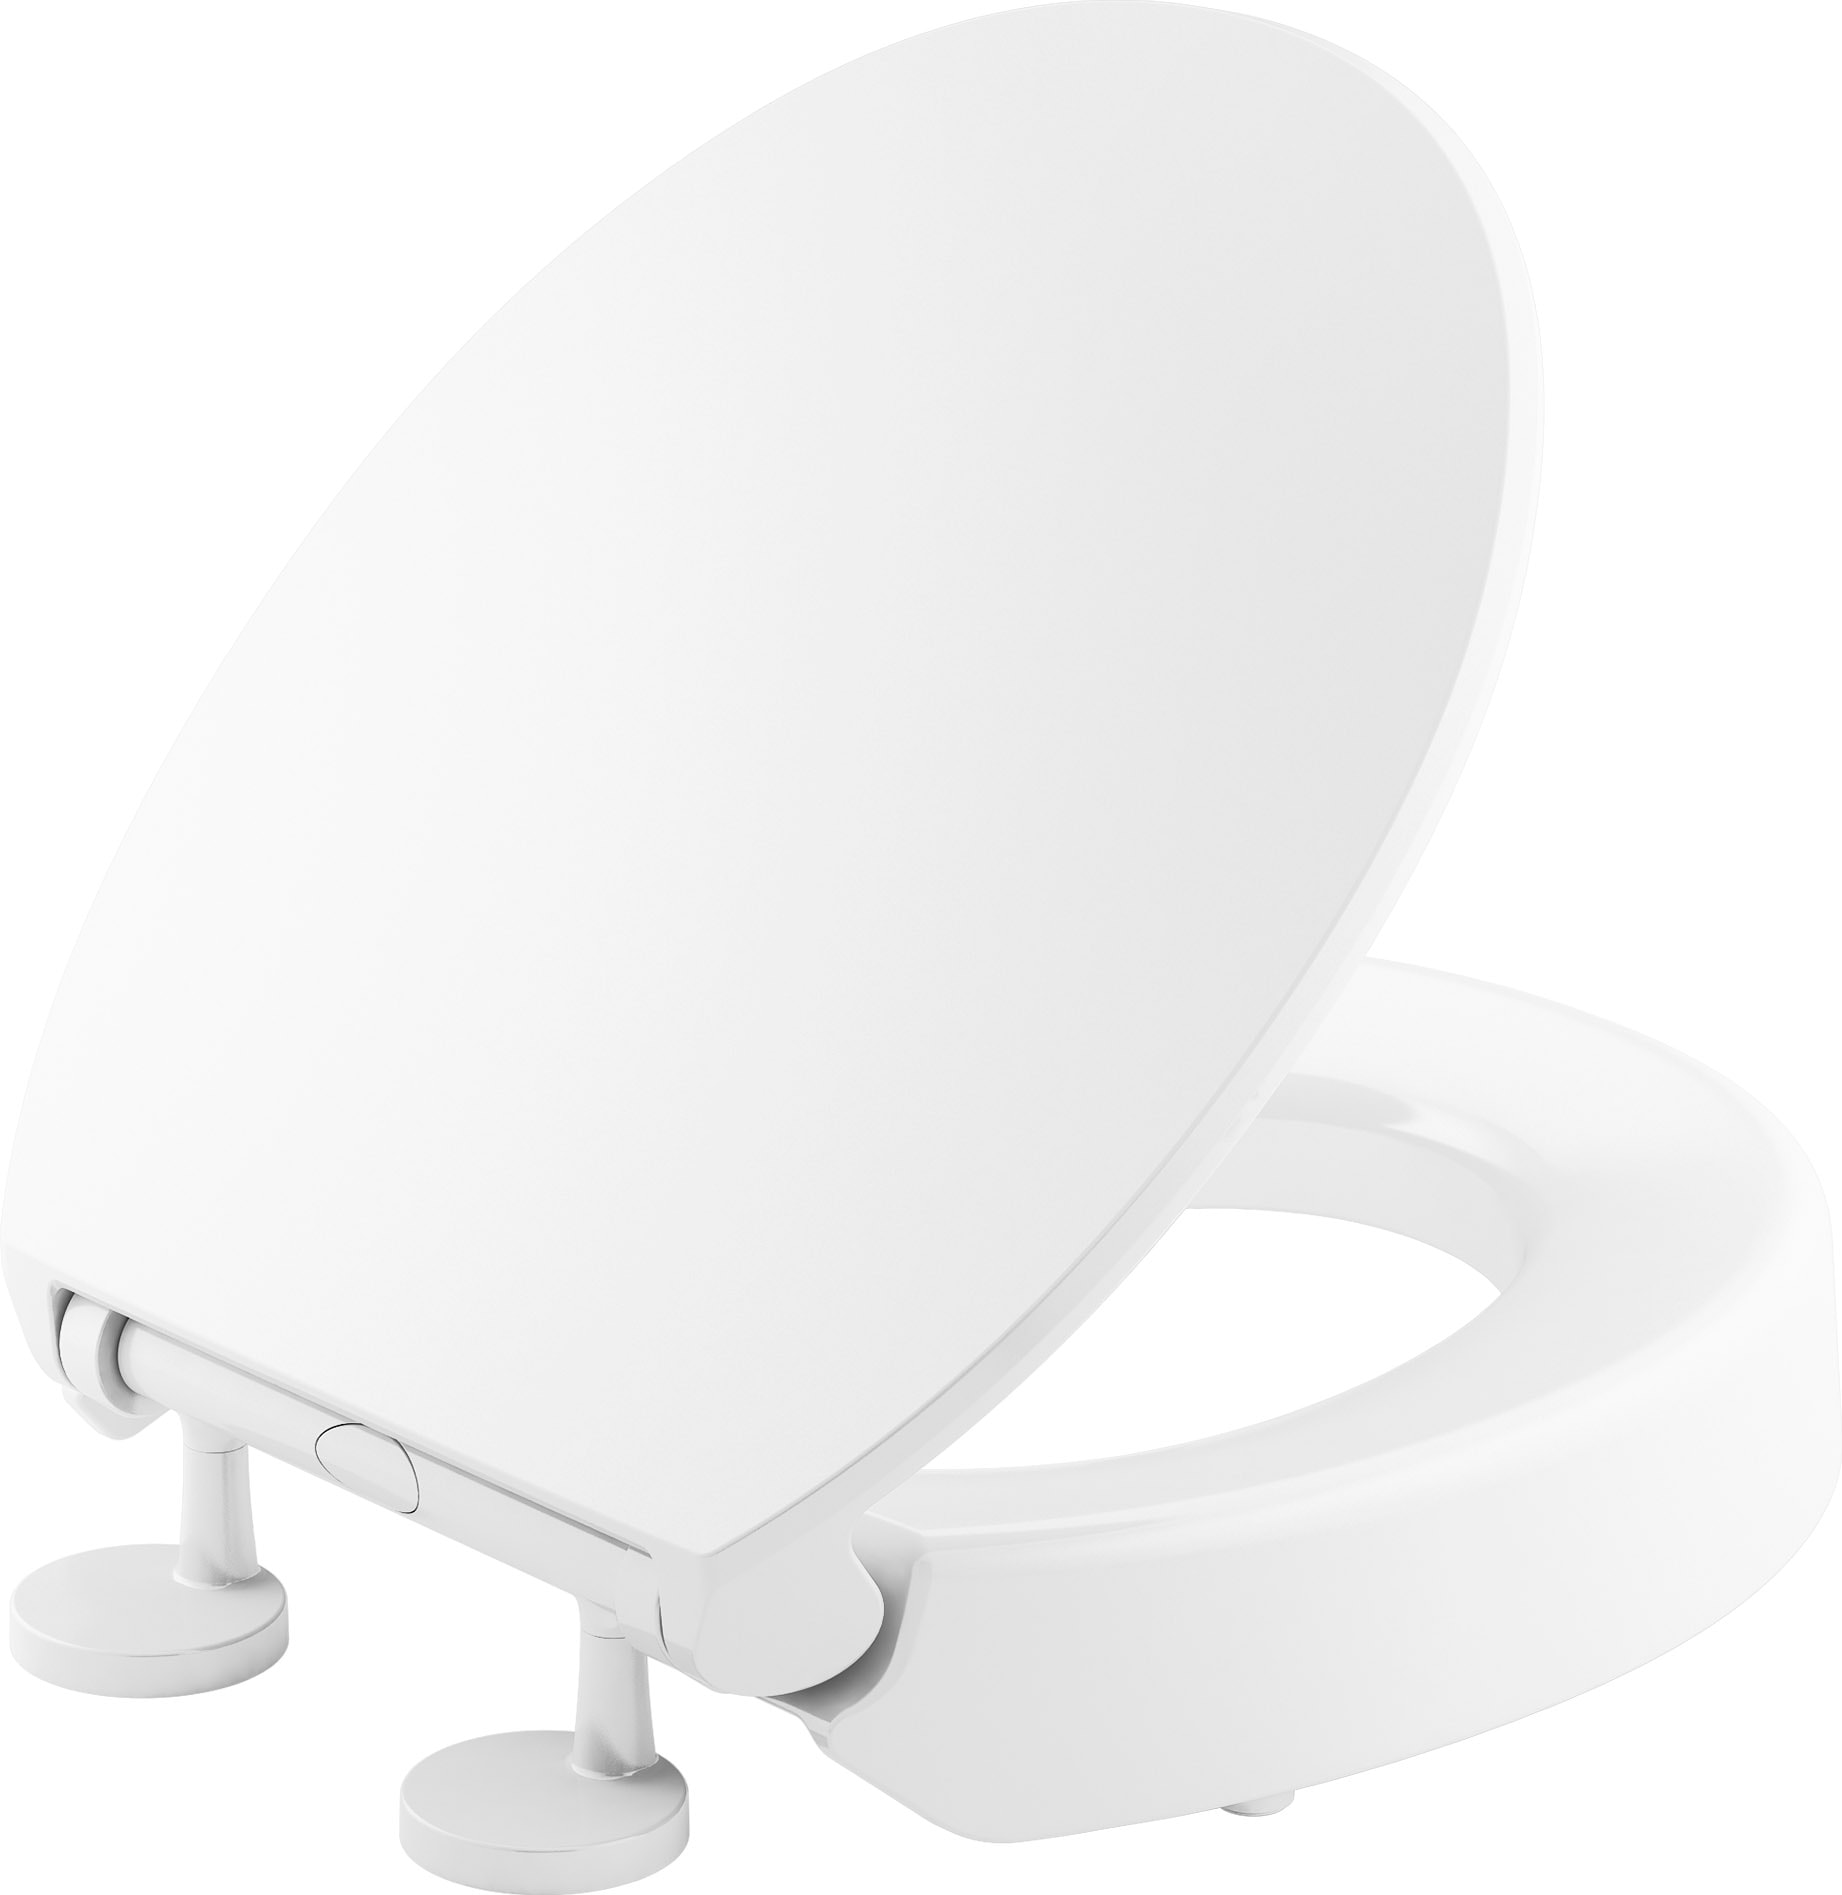 Umien / Potty Training Seat 2 in 1 Toilet Seat / Round - On Sale - Bed Bath  & Beyond - 31591932